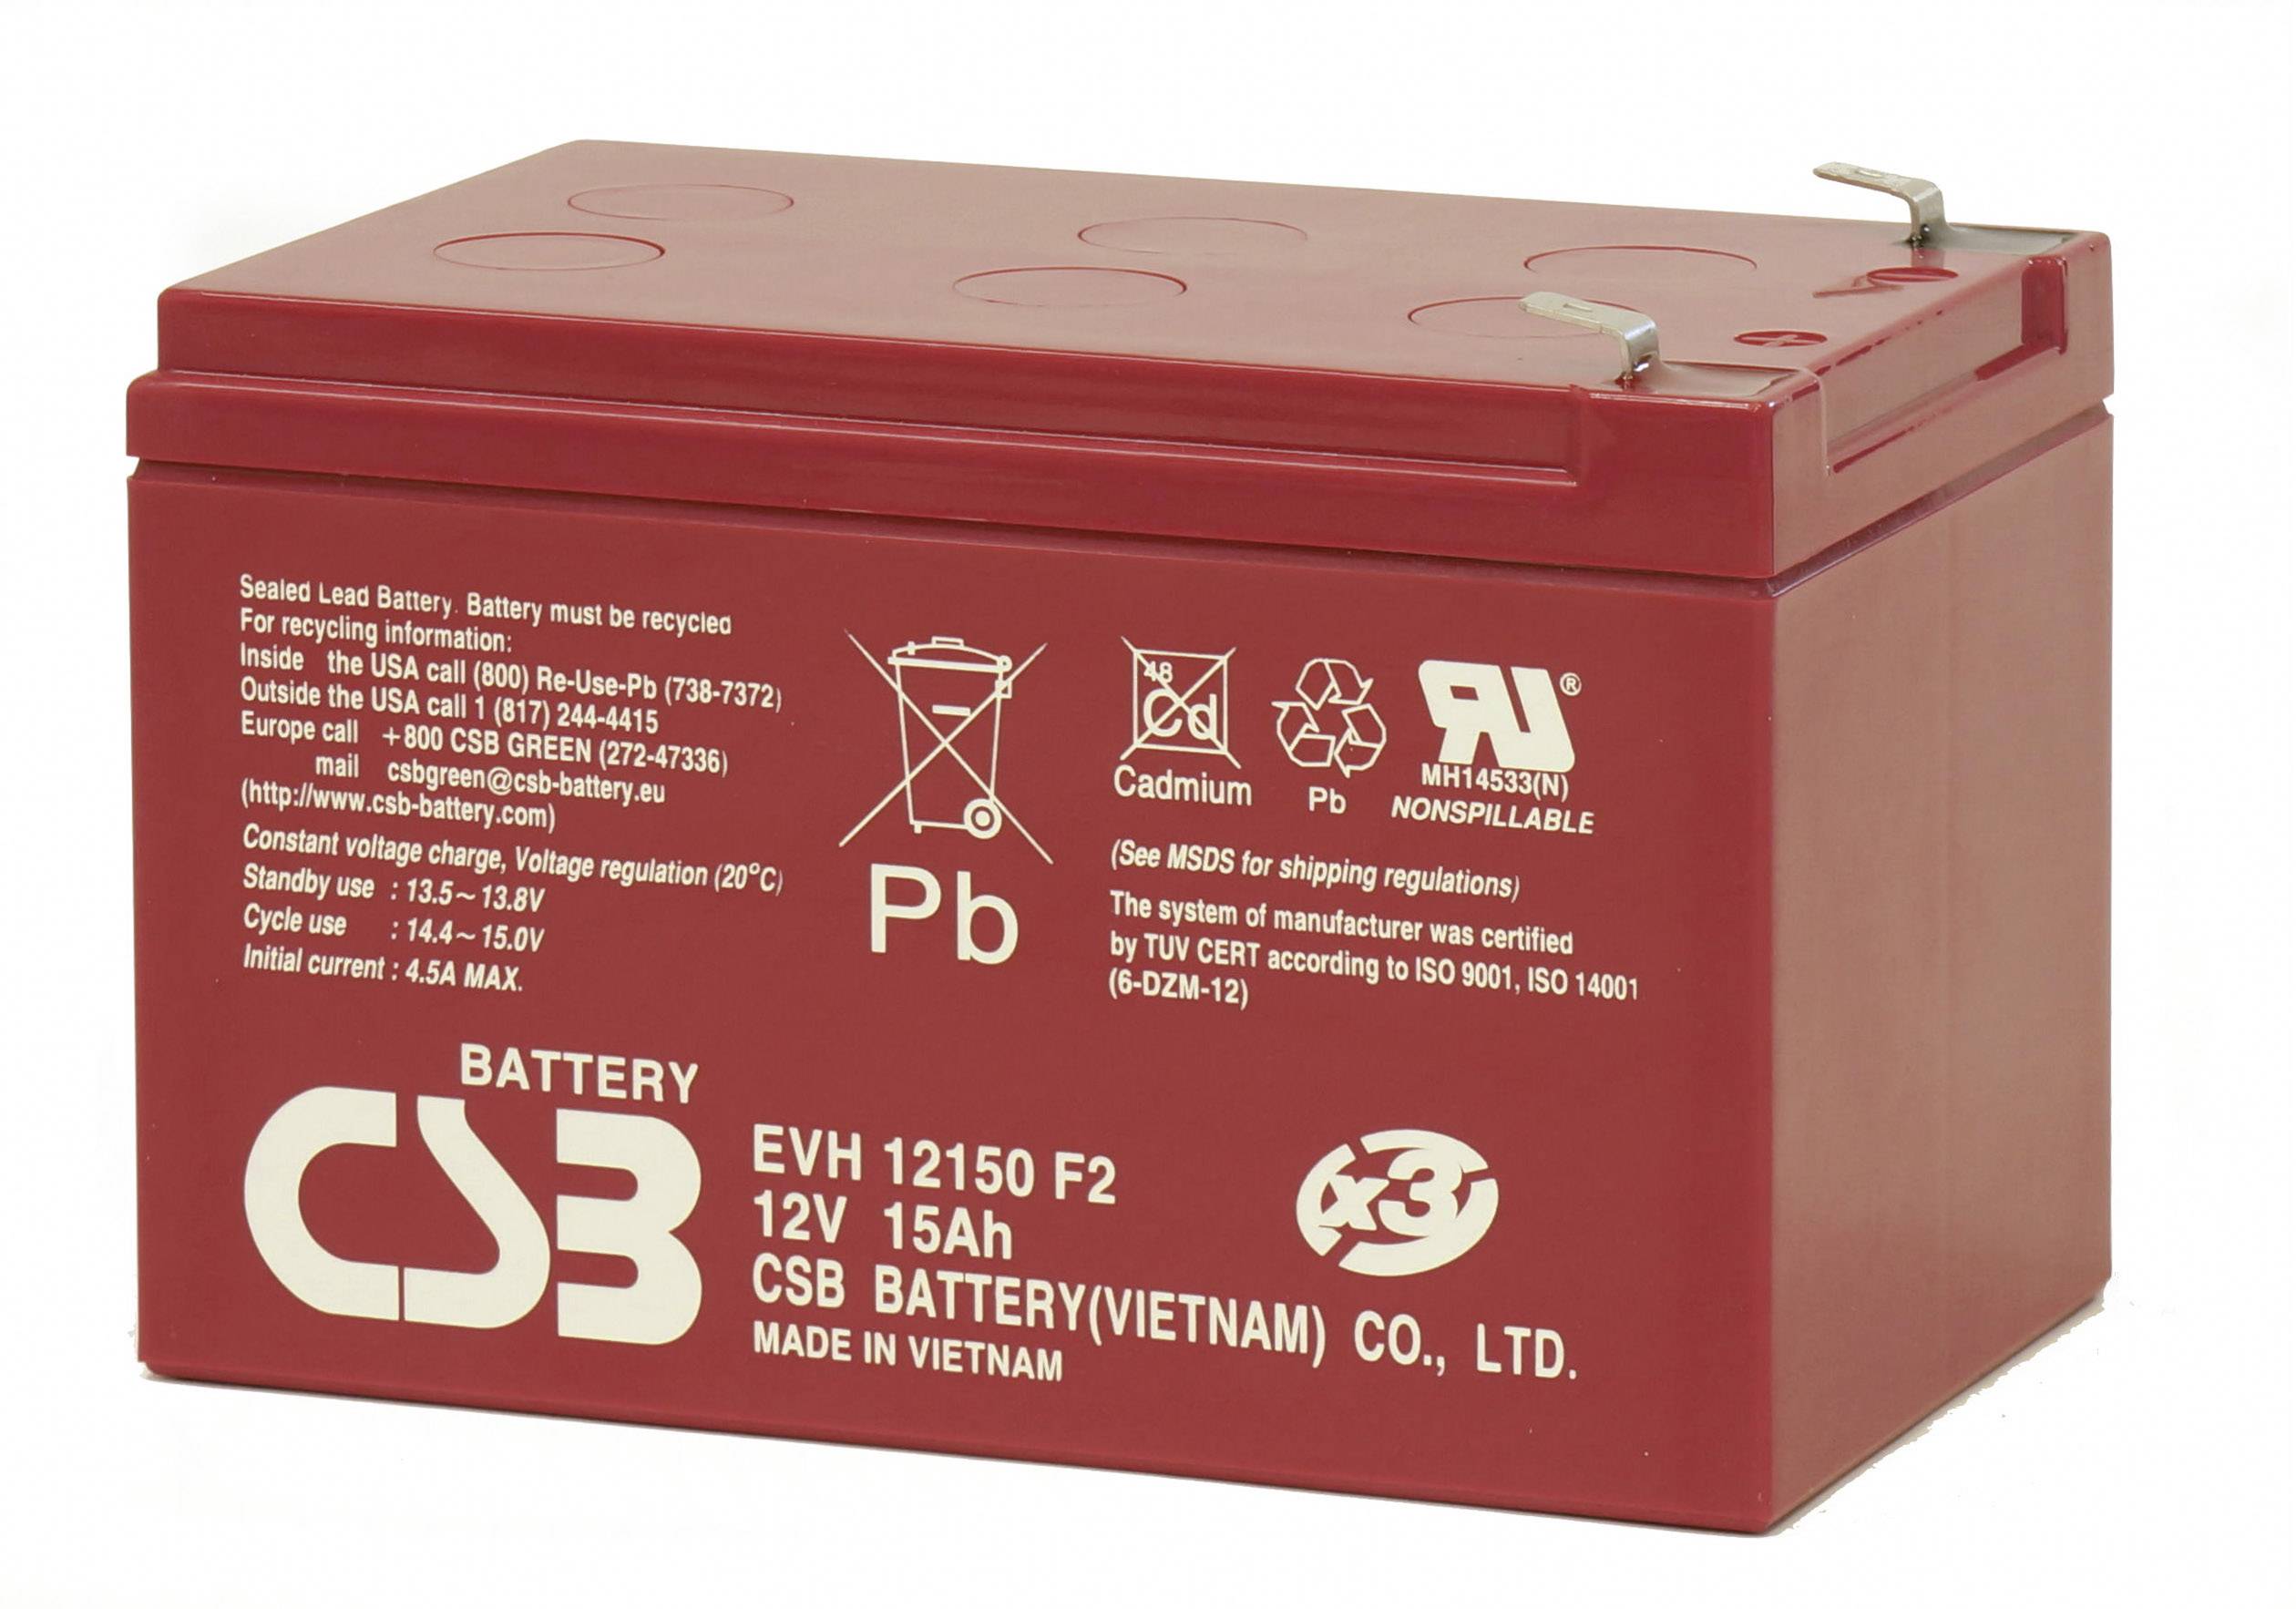 Details about   Battery pack COD 3x 12V/15Ah 36V Lead Battery Mach 1 Electric Scooter EVH 12150F2 1543 show original title 